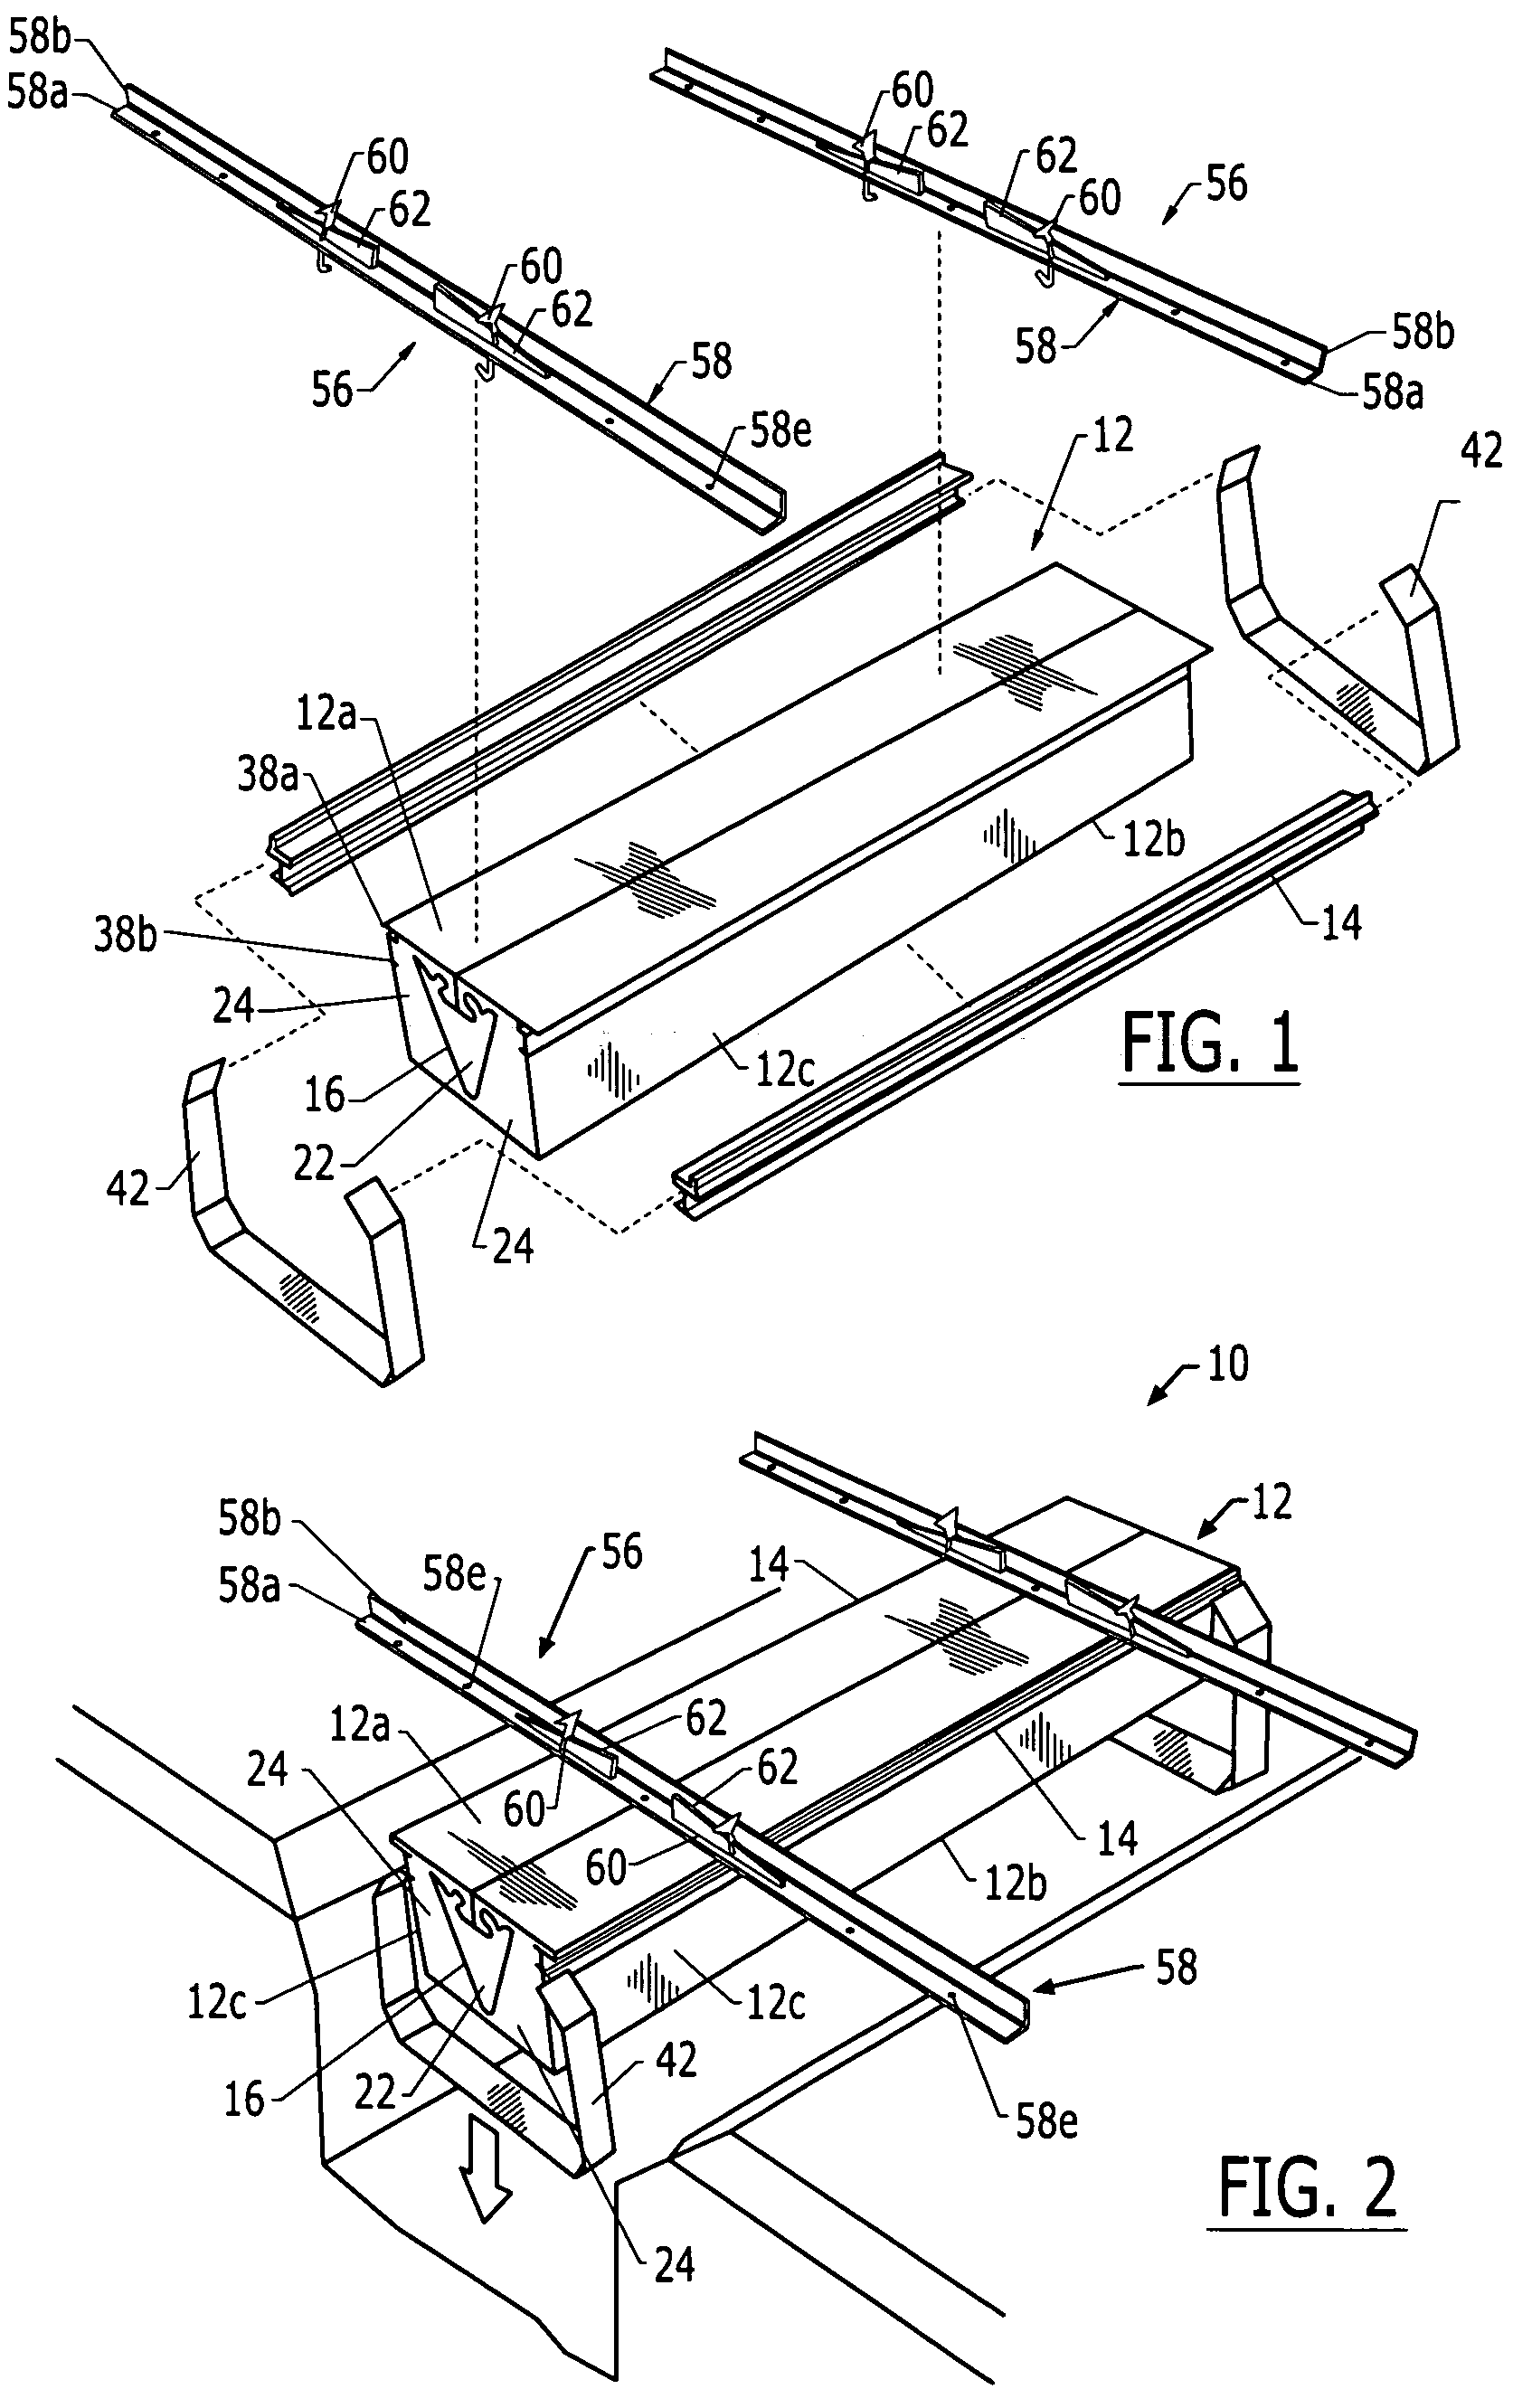 Method of fabricating a longitudinal frame member of a trench-forming assembly